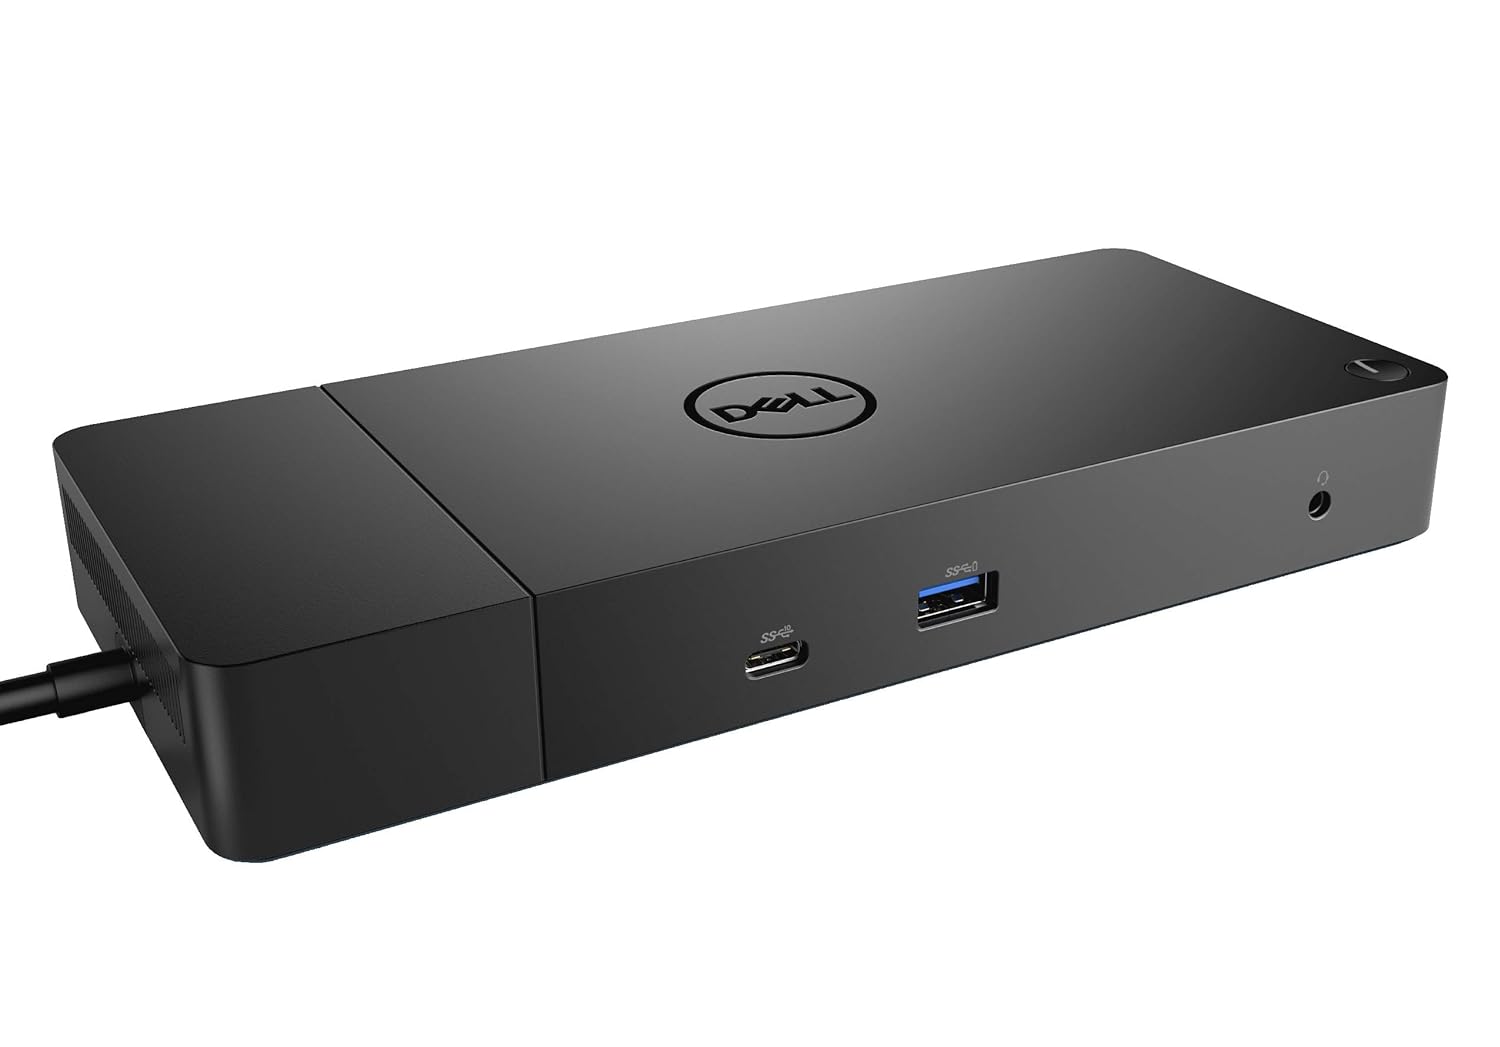 keeping-up-to-date-updating-your-dell-docking-station